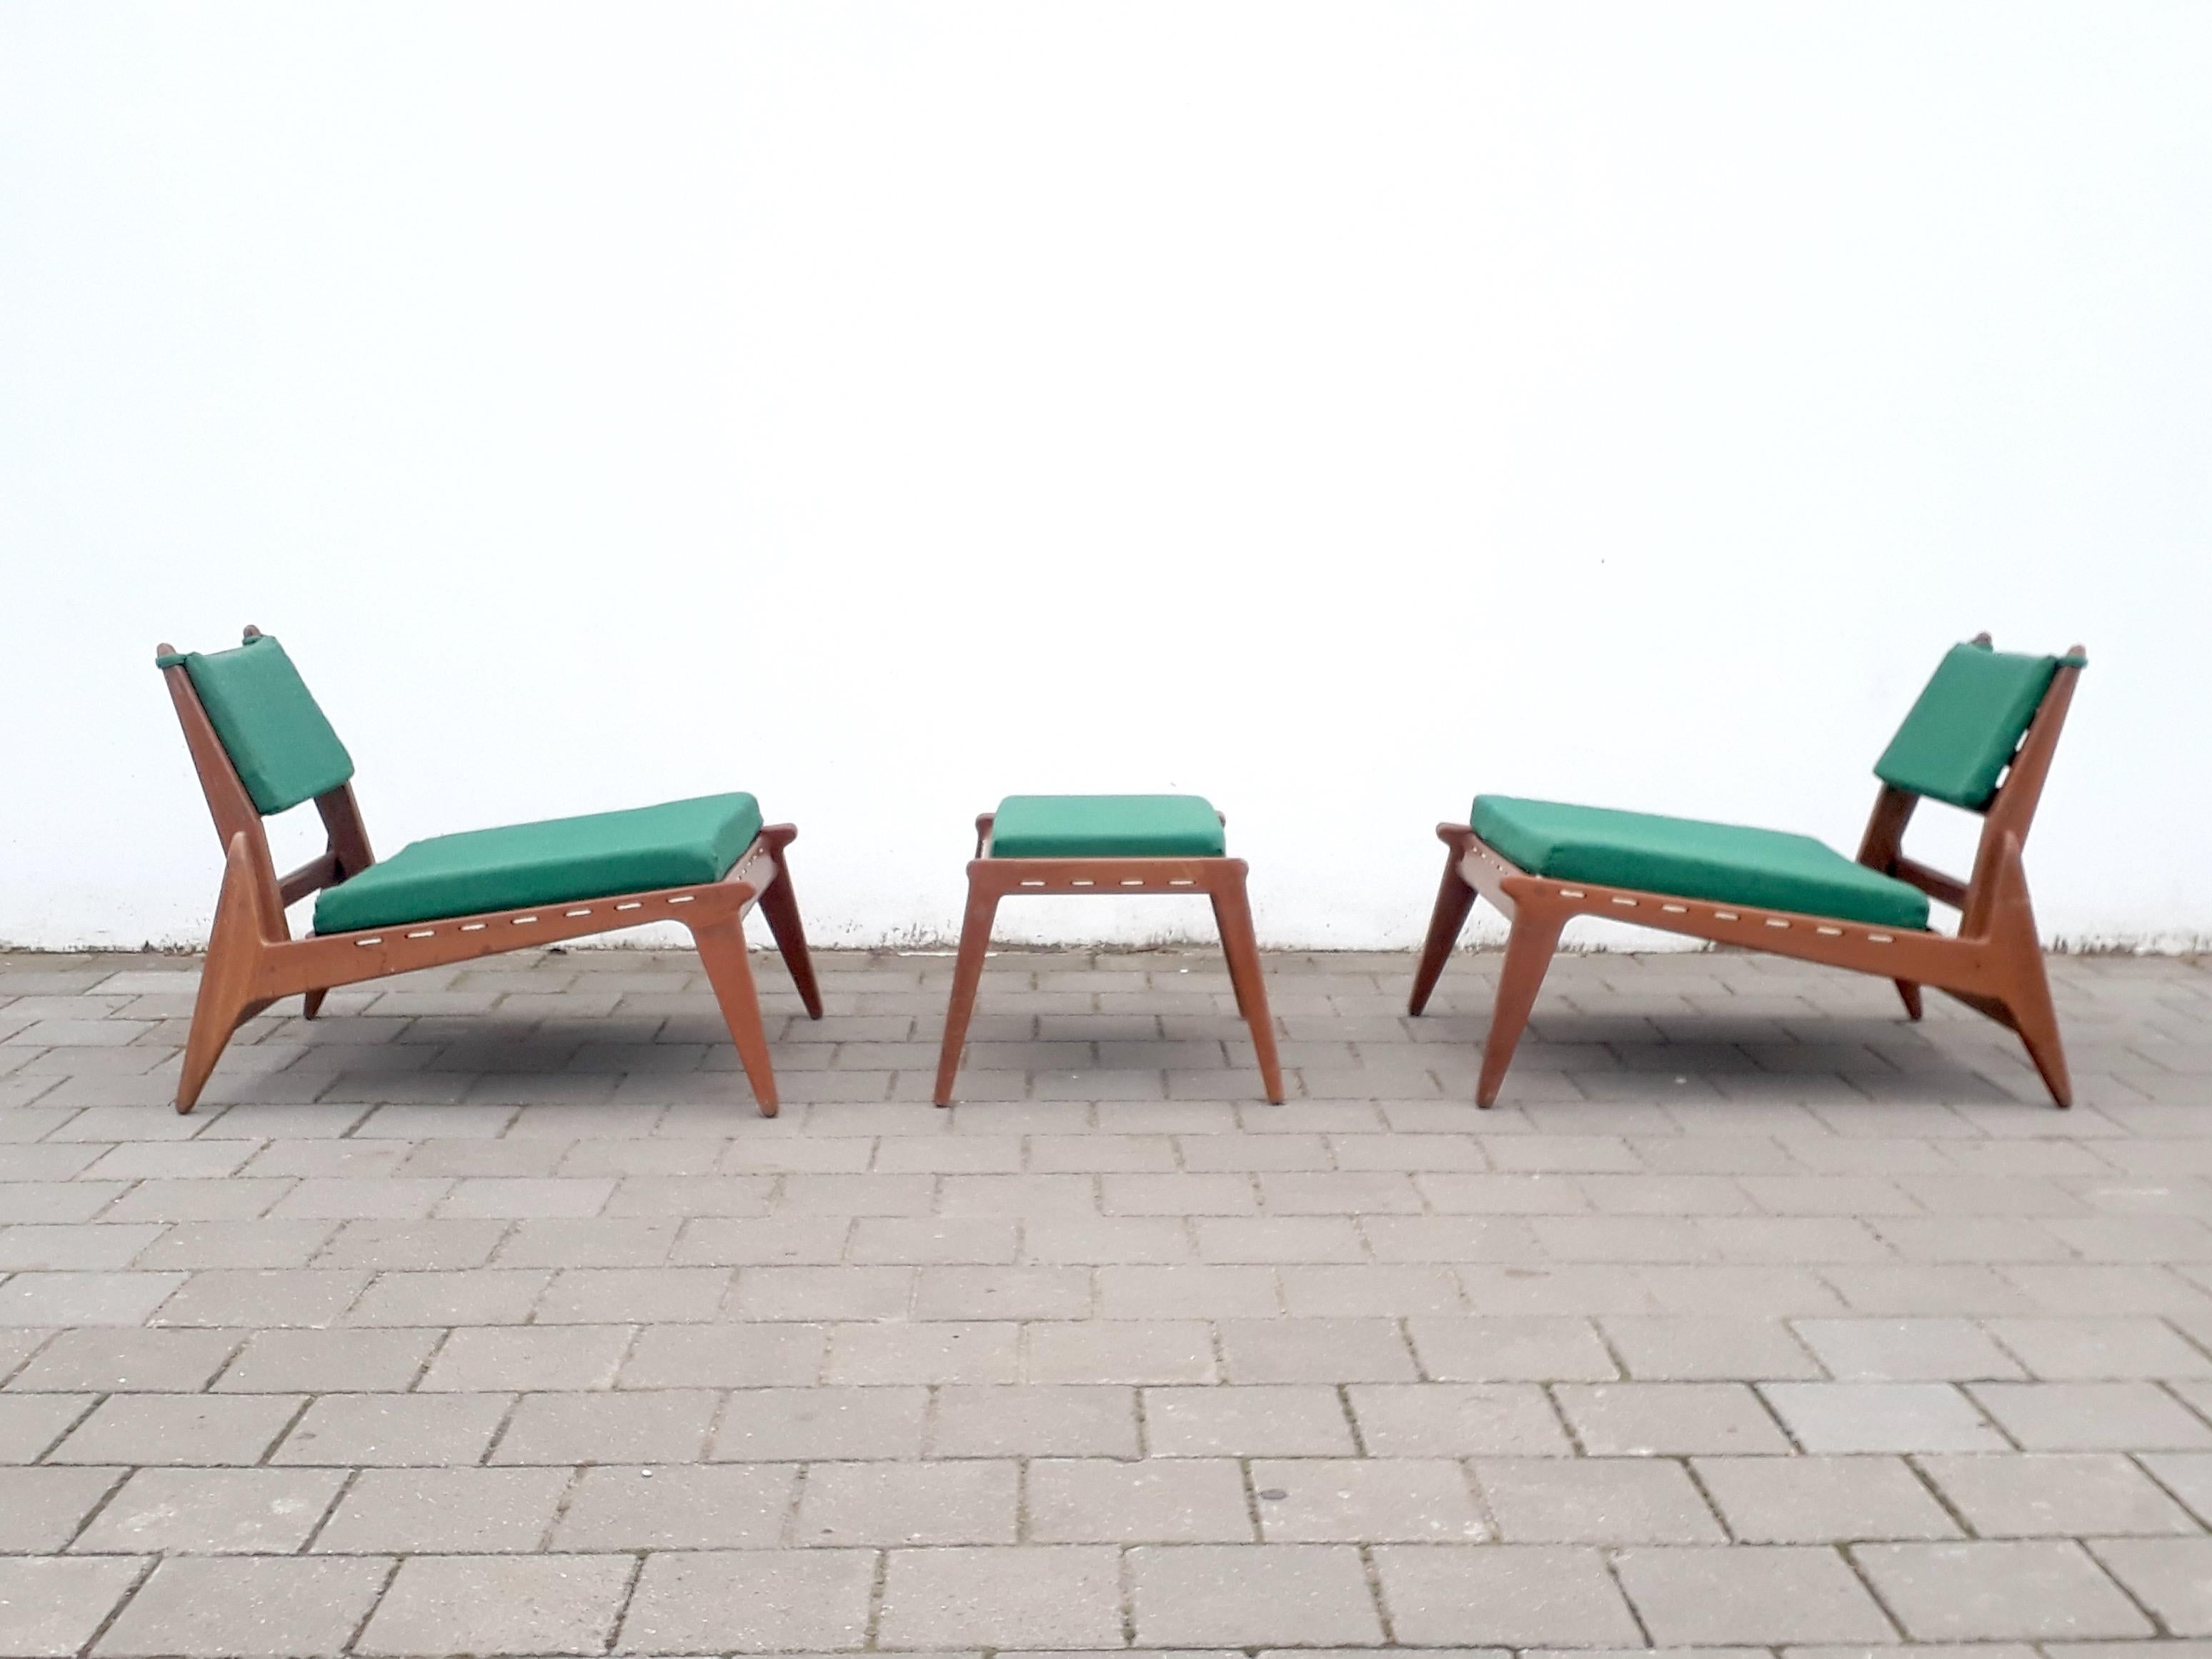 Mid-20th Century 2 German Hunting Chairs Organic Teak Wood Attributed to Otto Frei, 1950s For Sale